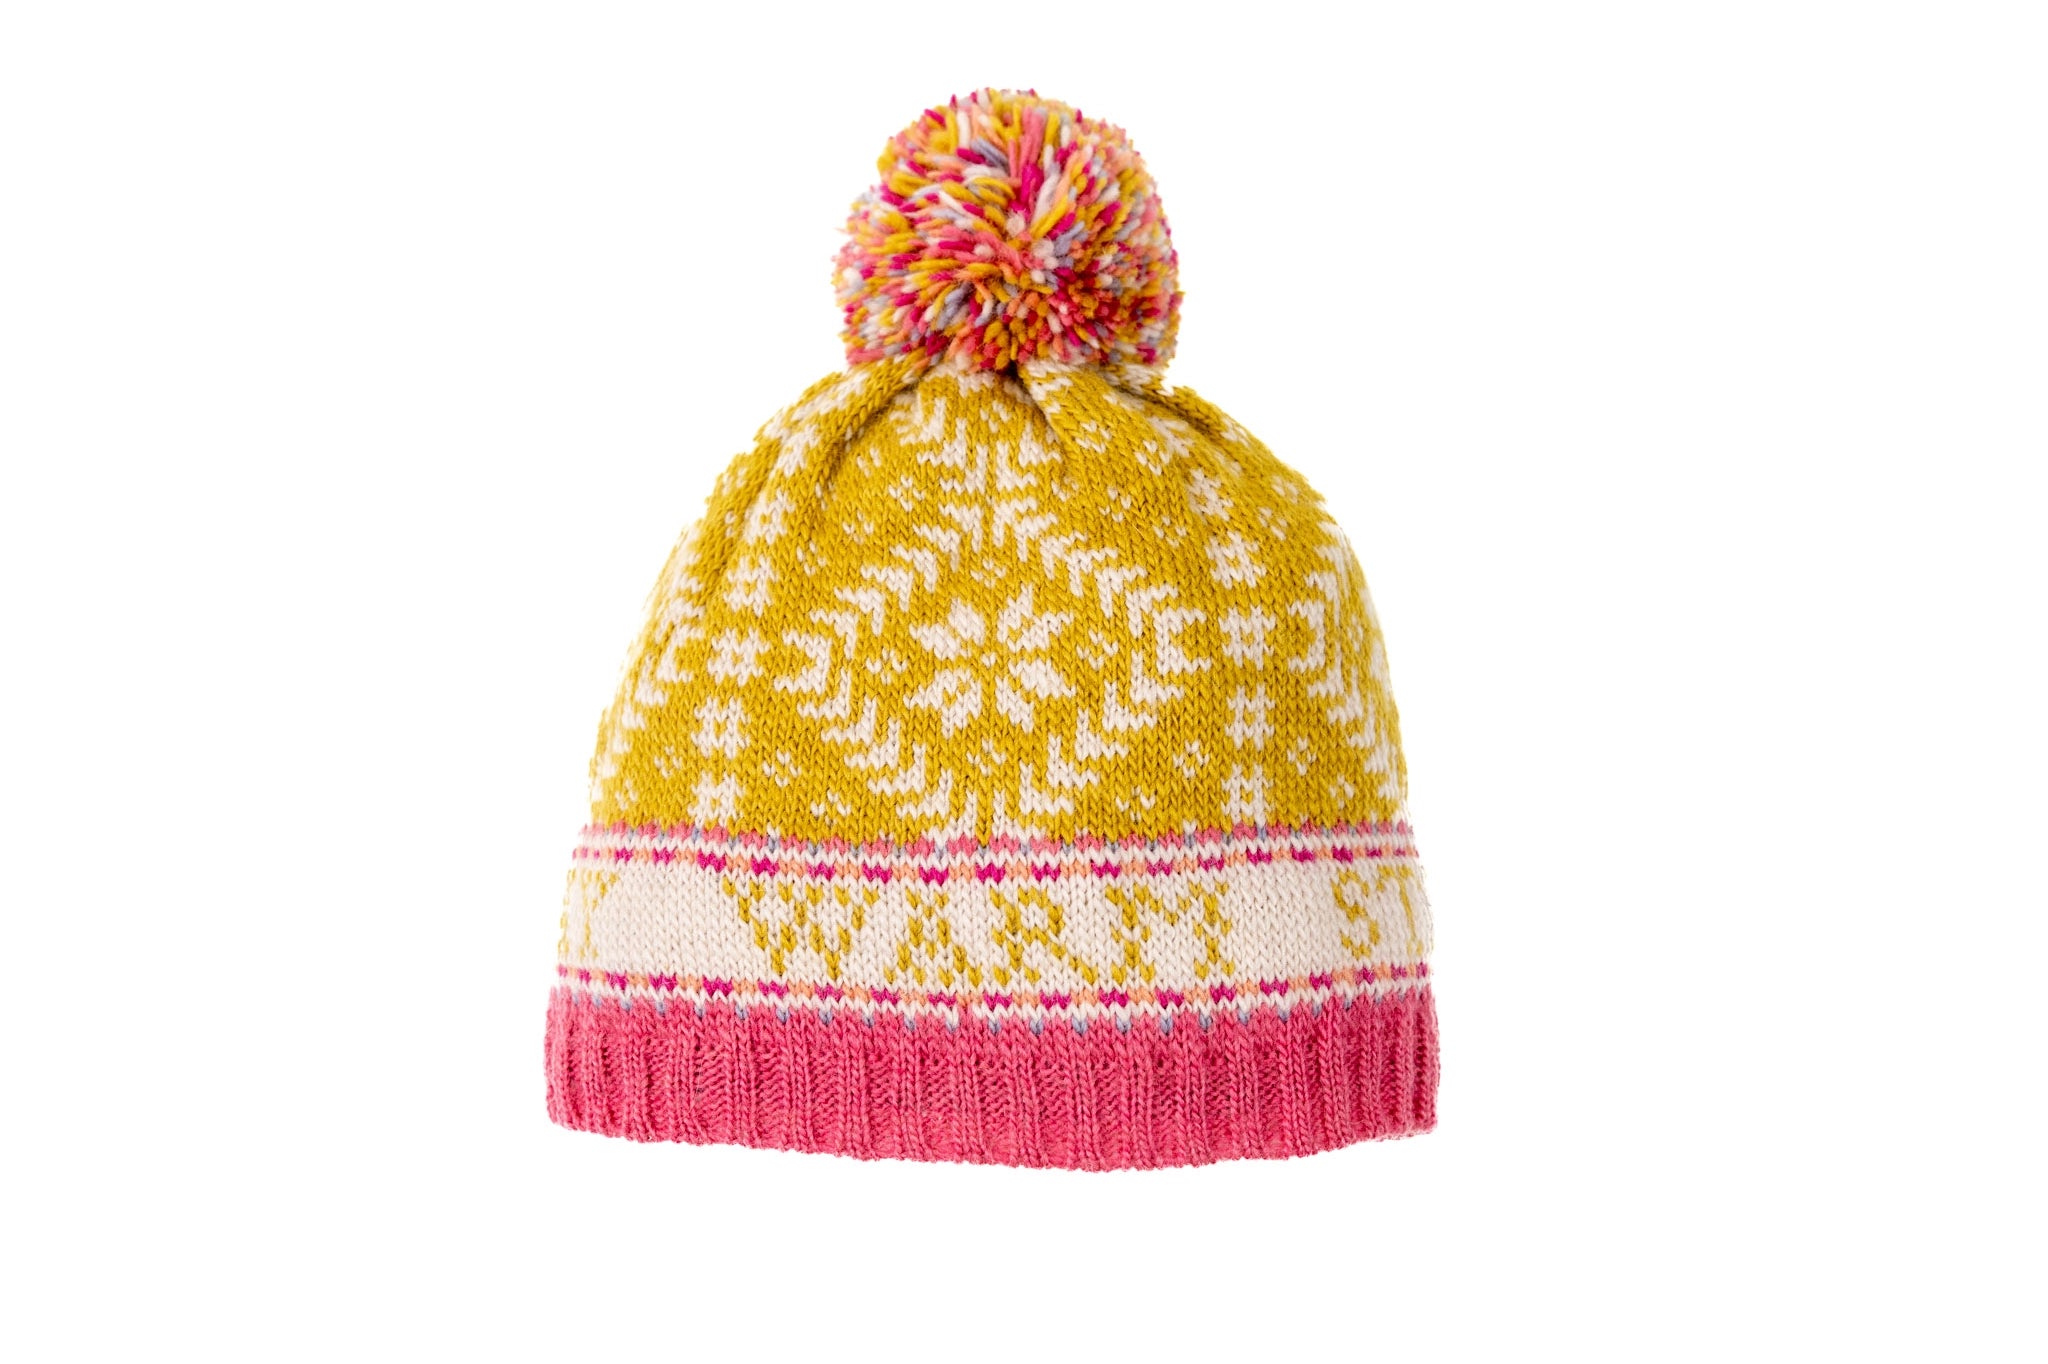 Novelty Nordic Hat in Stay Warm